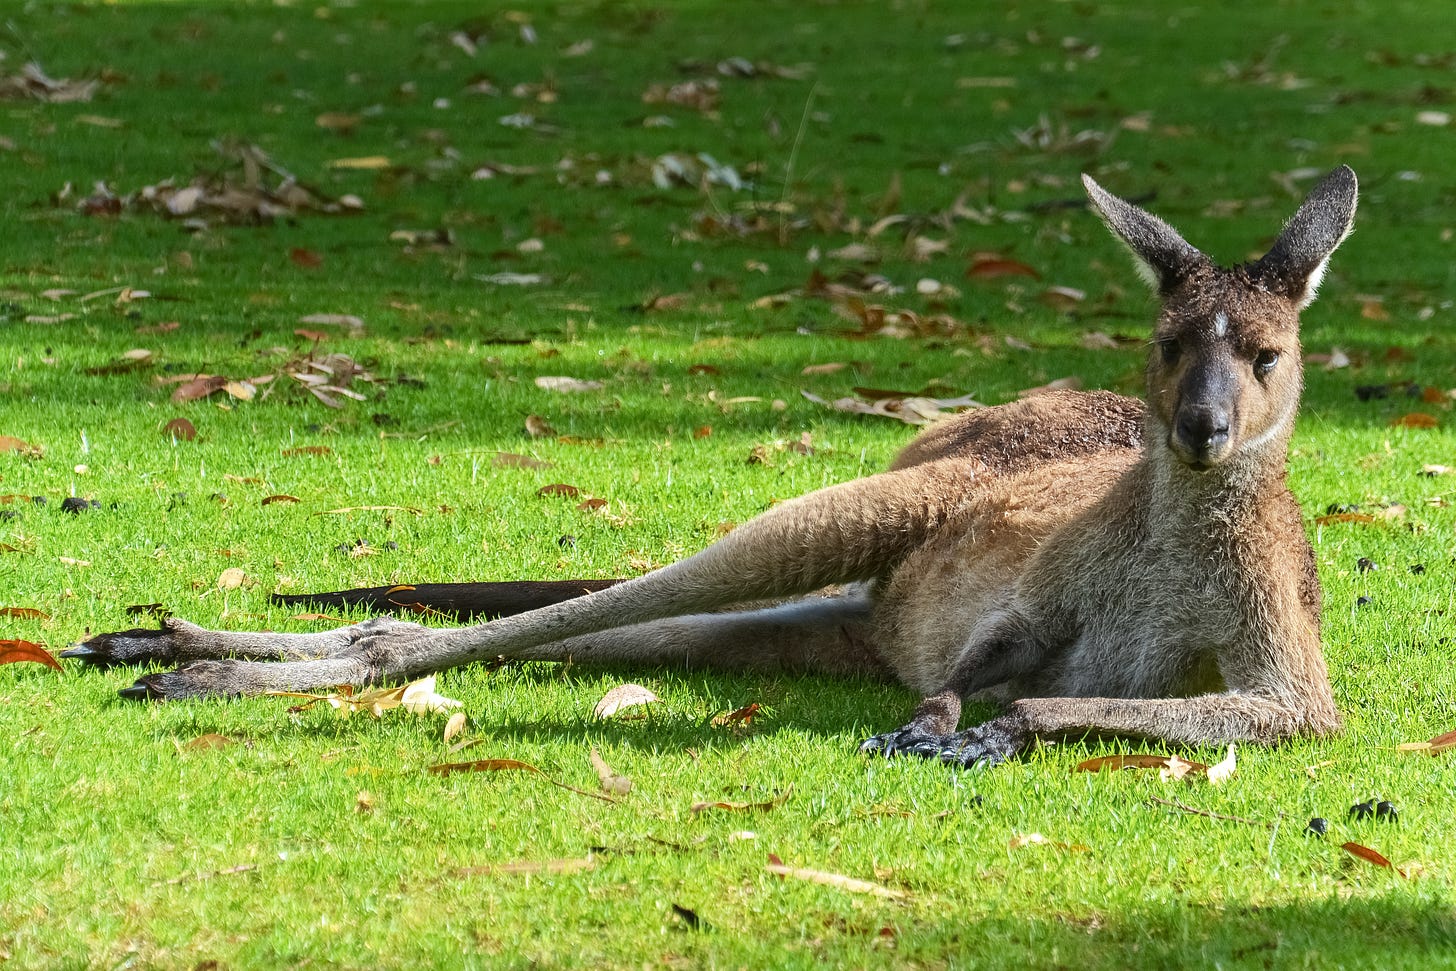 A kangaroo lounging on the grass in the sun